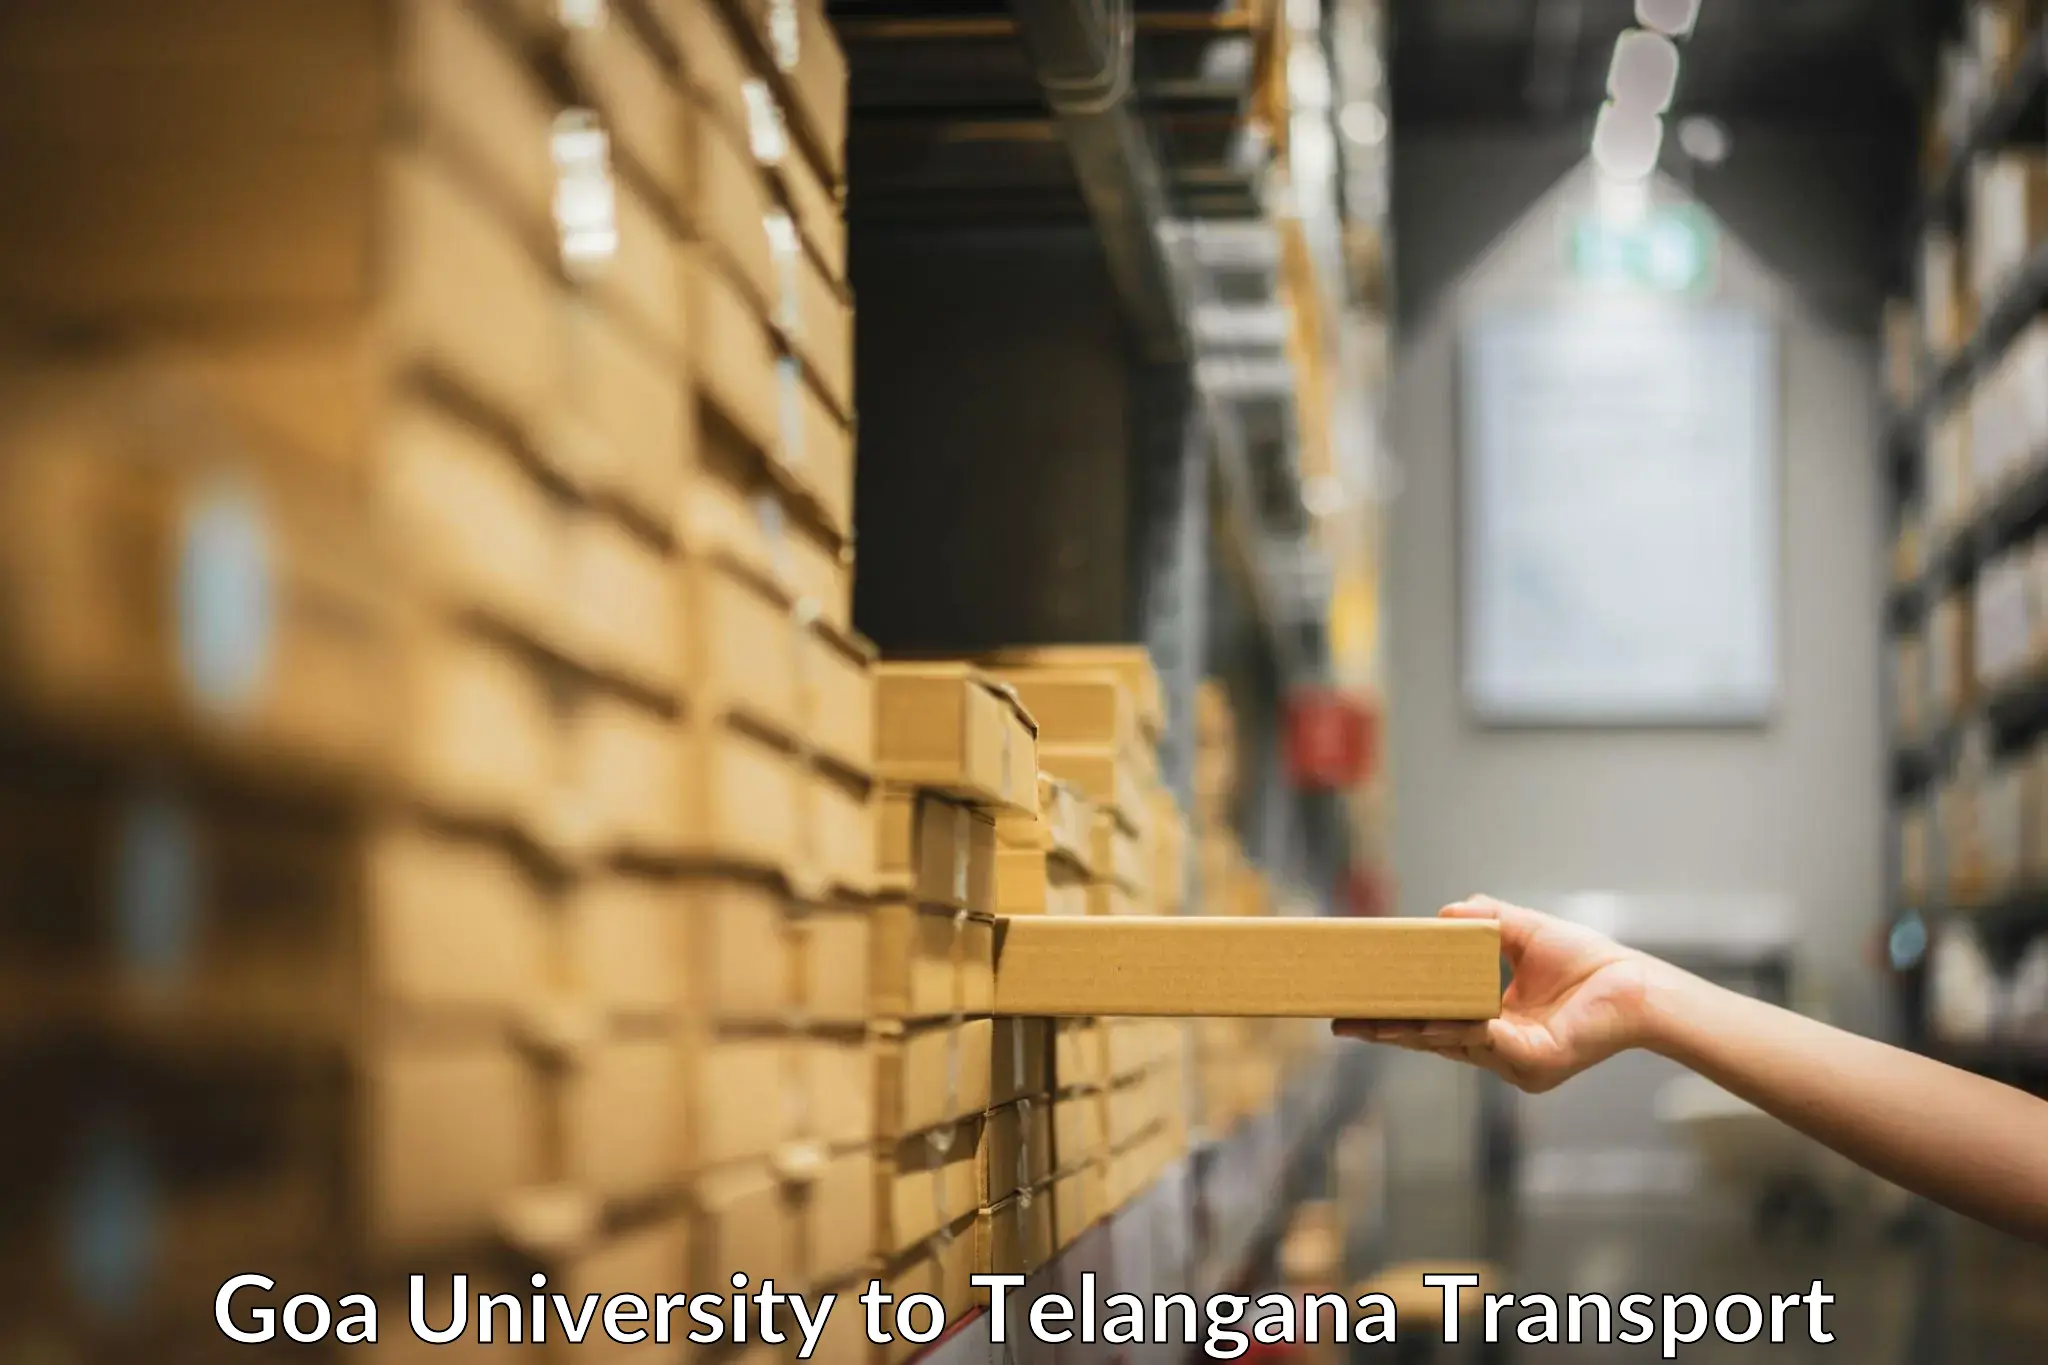 Transport shared services Goa University to International Institute of Information Technology Hyderabad